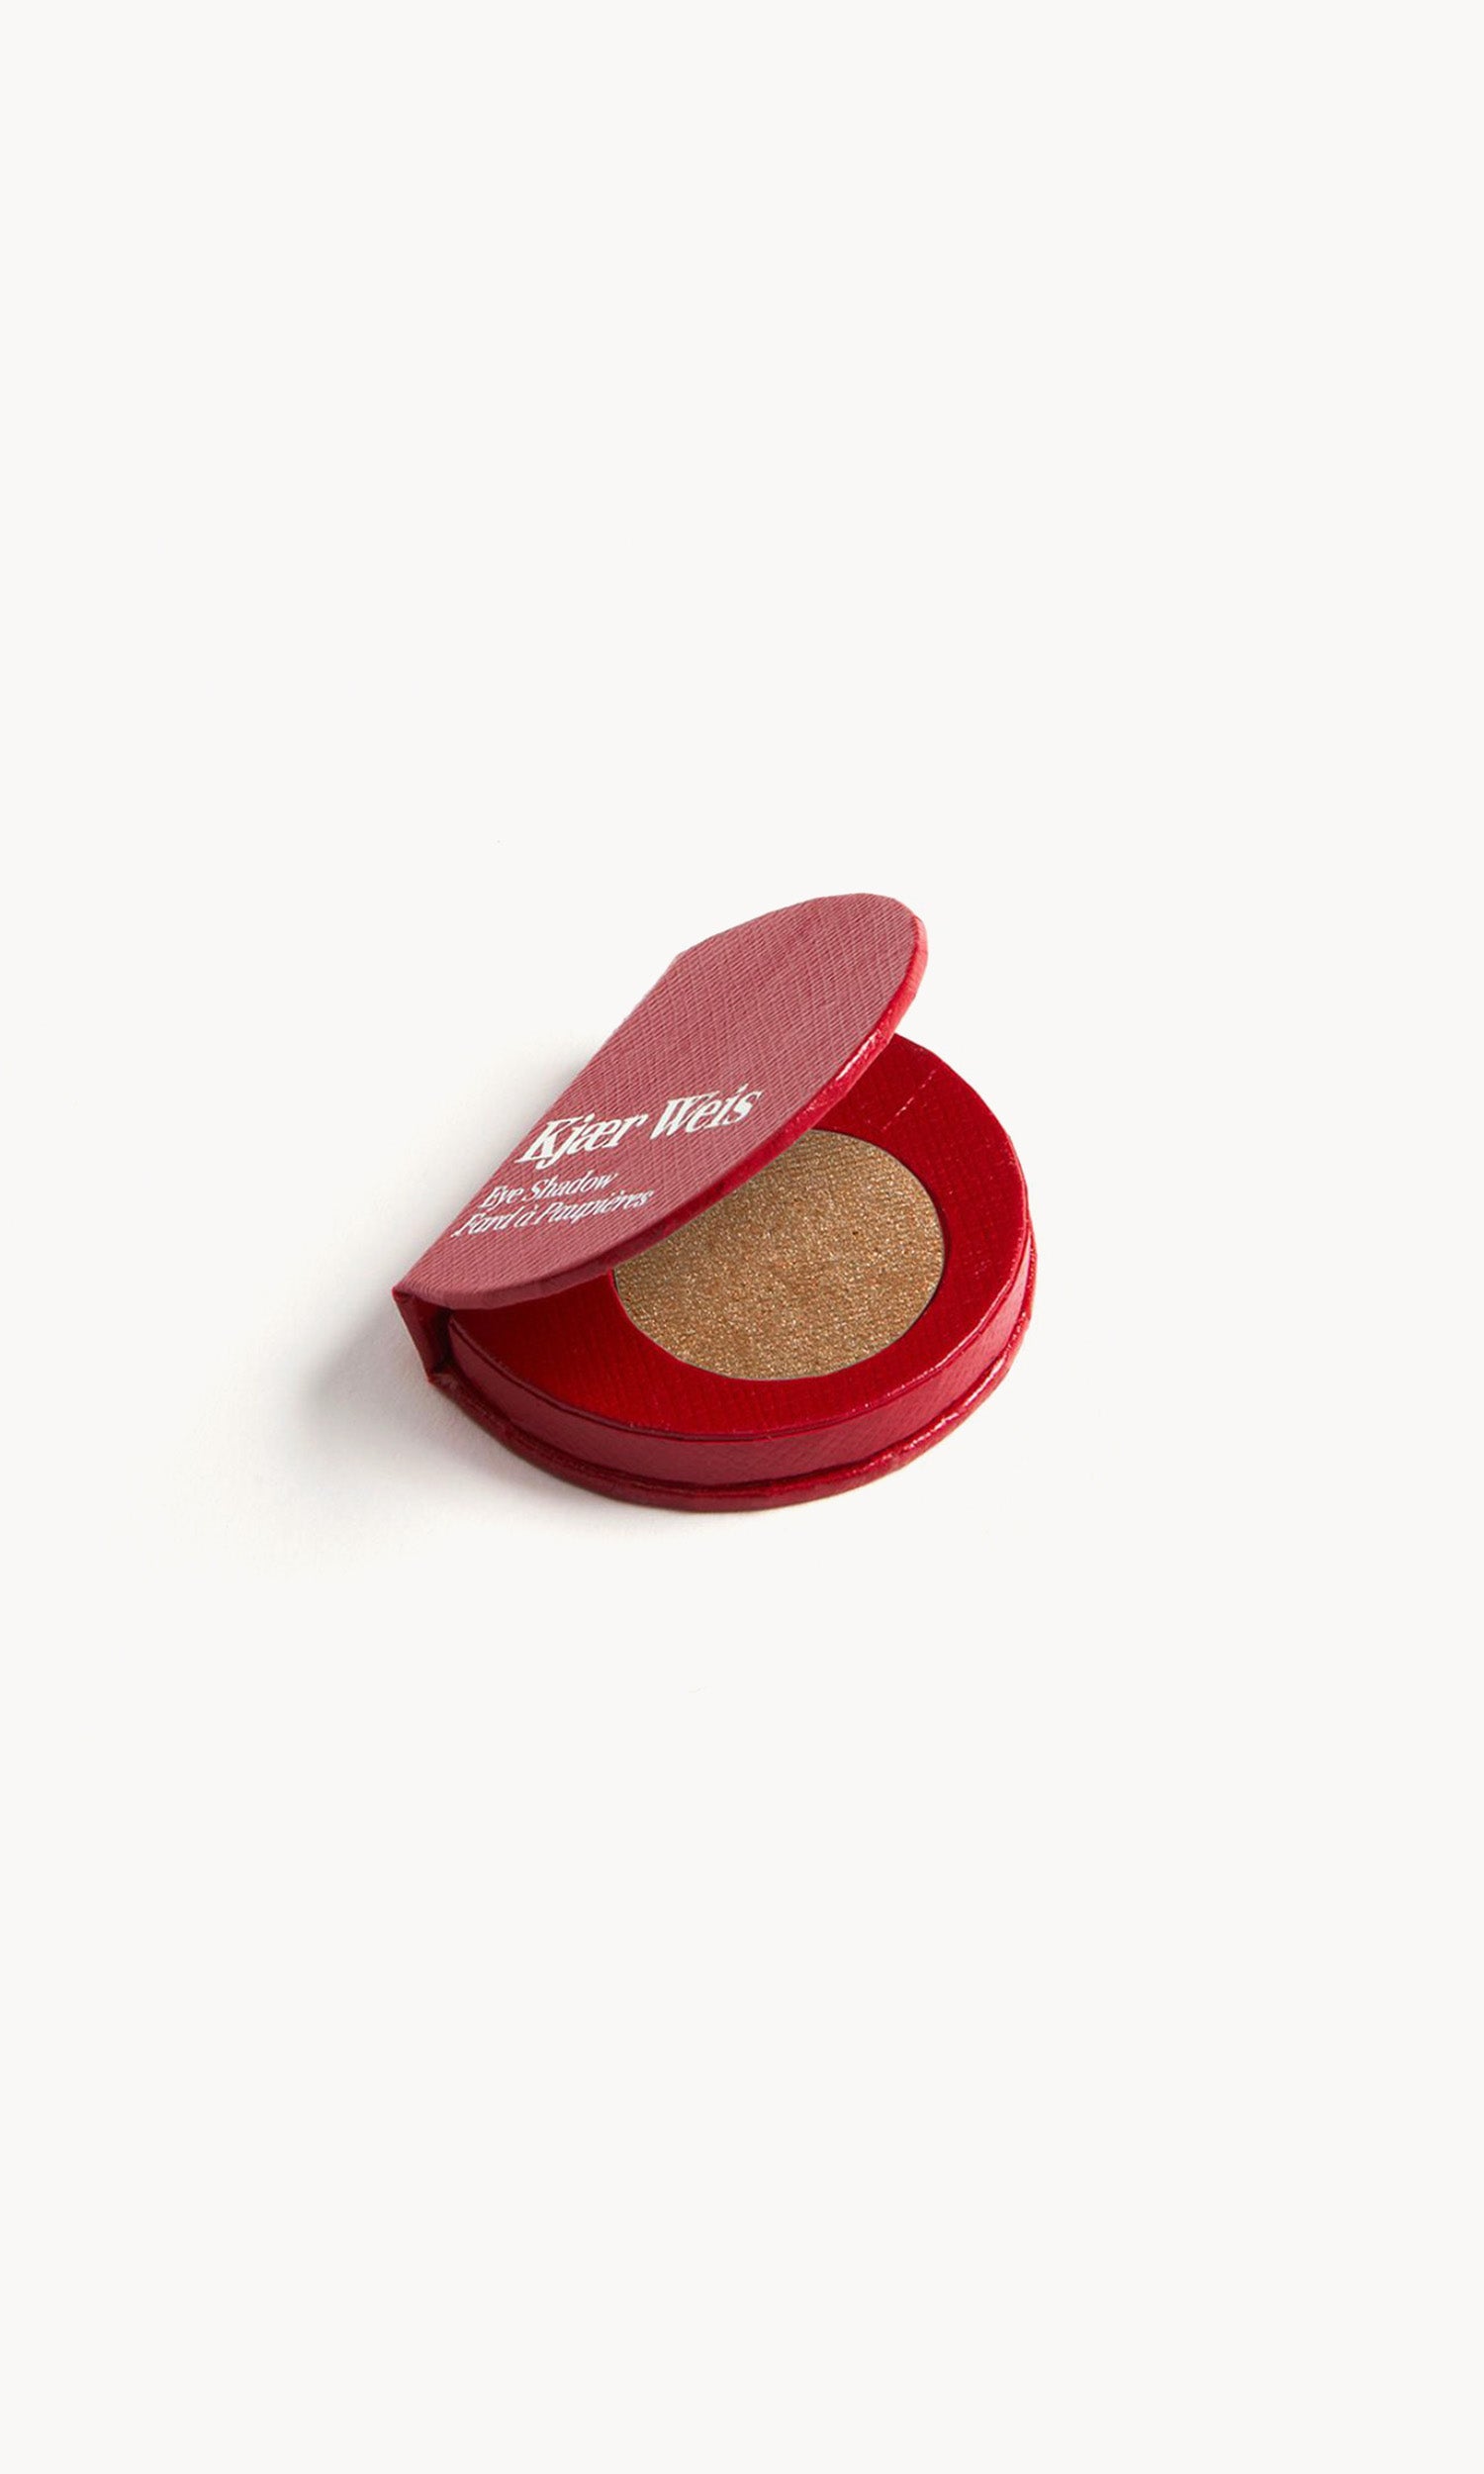 Red KW palette open to show the brown-gold eye shadow inside